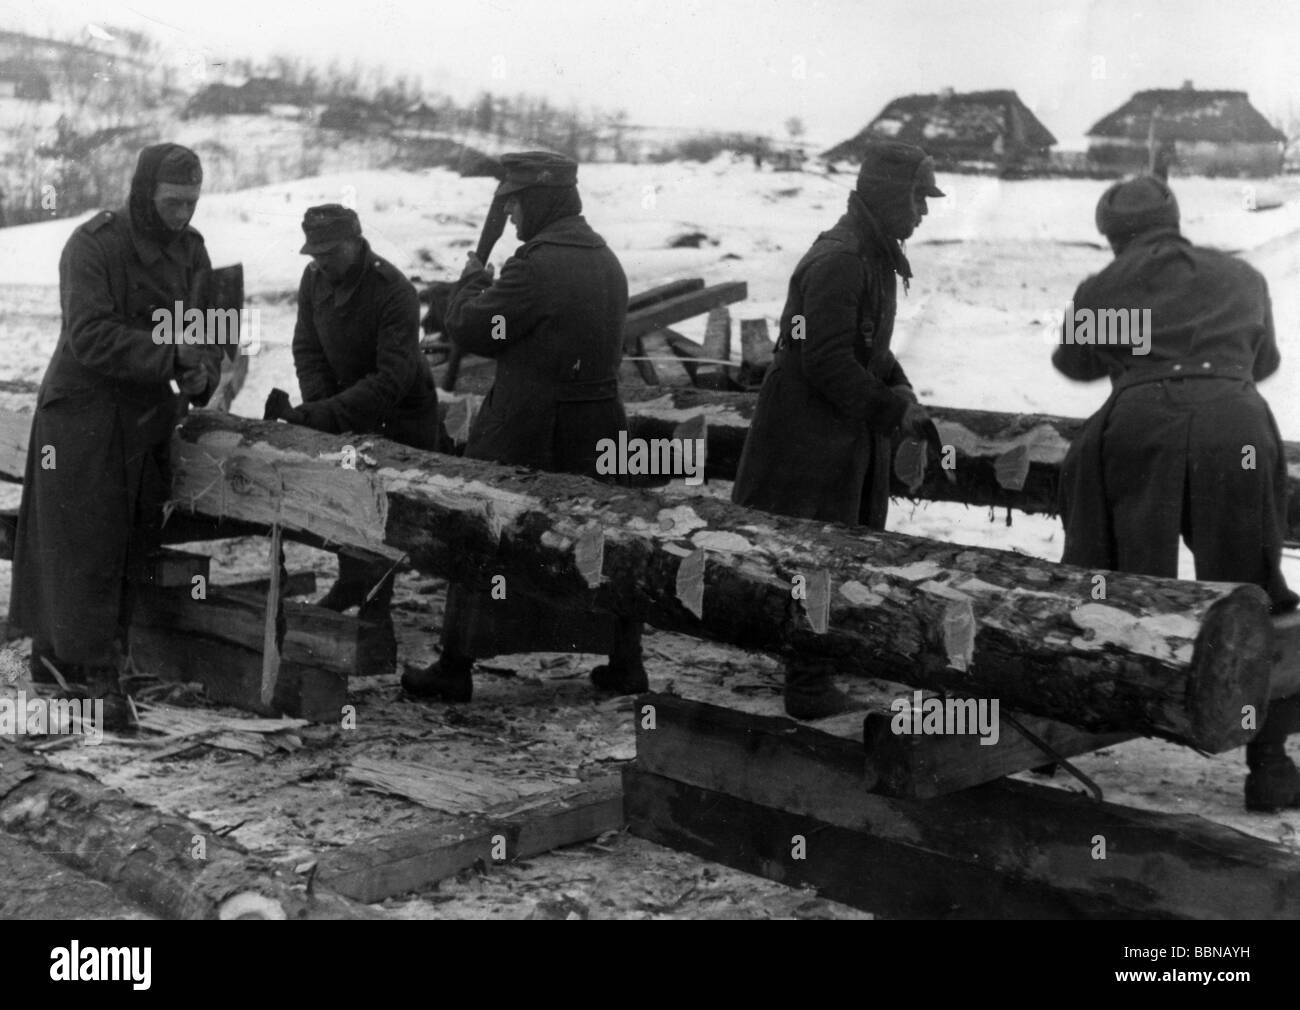 events, Second World War / WWII, Russia 1944 / 1945, sappers of a German mountain unit repairing a damaged railway line, Britskoye area, Ukraine, early 1944, military engineers, engineer, rail, Wehrmacht, Third Reich, Soviet Union, USSR, Eastern Front, working, wood, tree trunk, trunks, railroad tie, ties, axe, axes, village, houses, snow, winter, 20th century, historic, historical, people, 1940s, Stock Photo